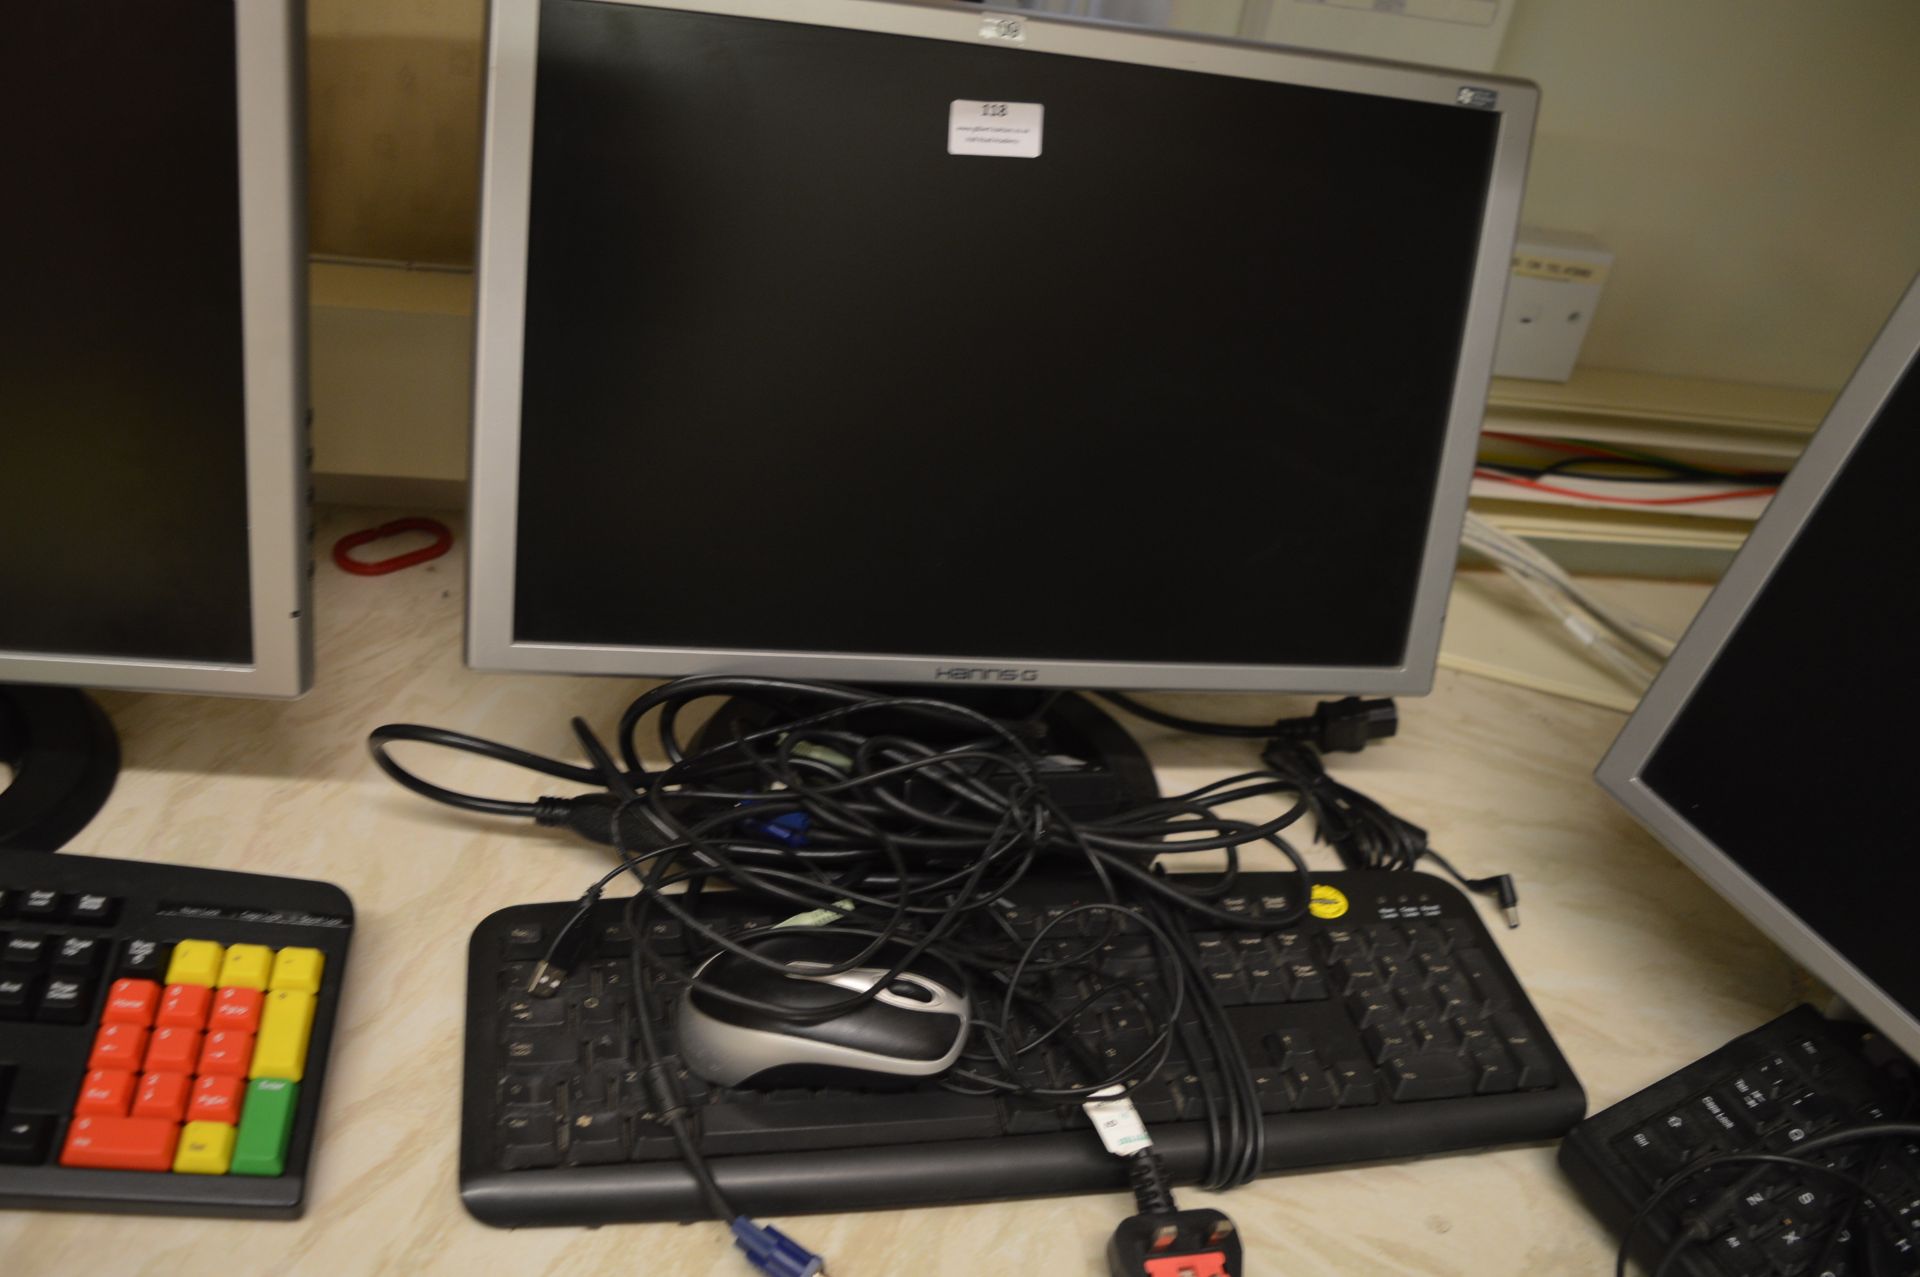 *Hanns.G HW191D Computer Monitor with Keyboard Mouse and Cable